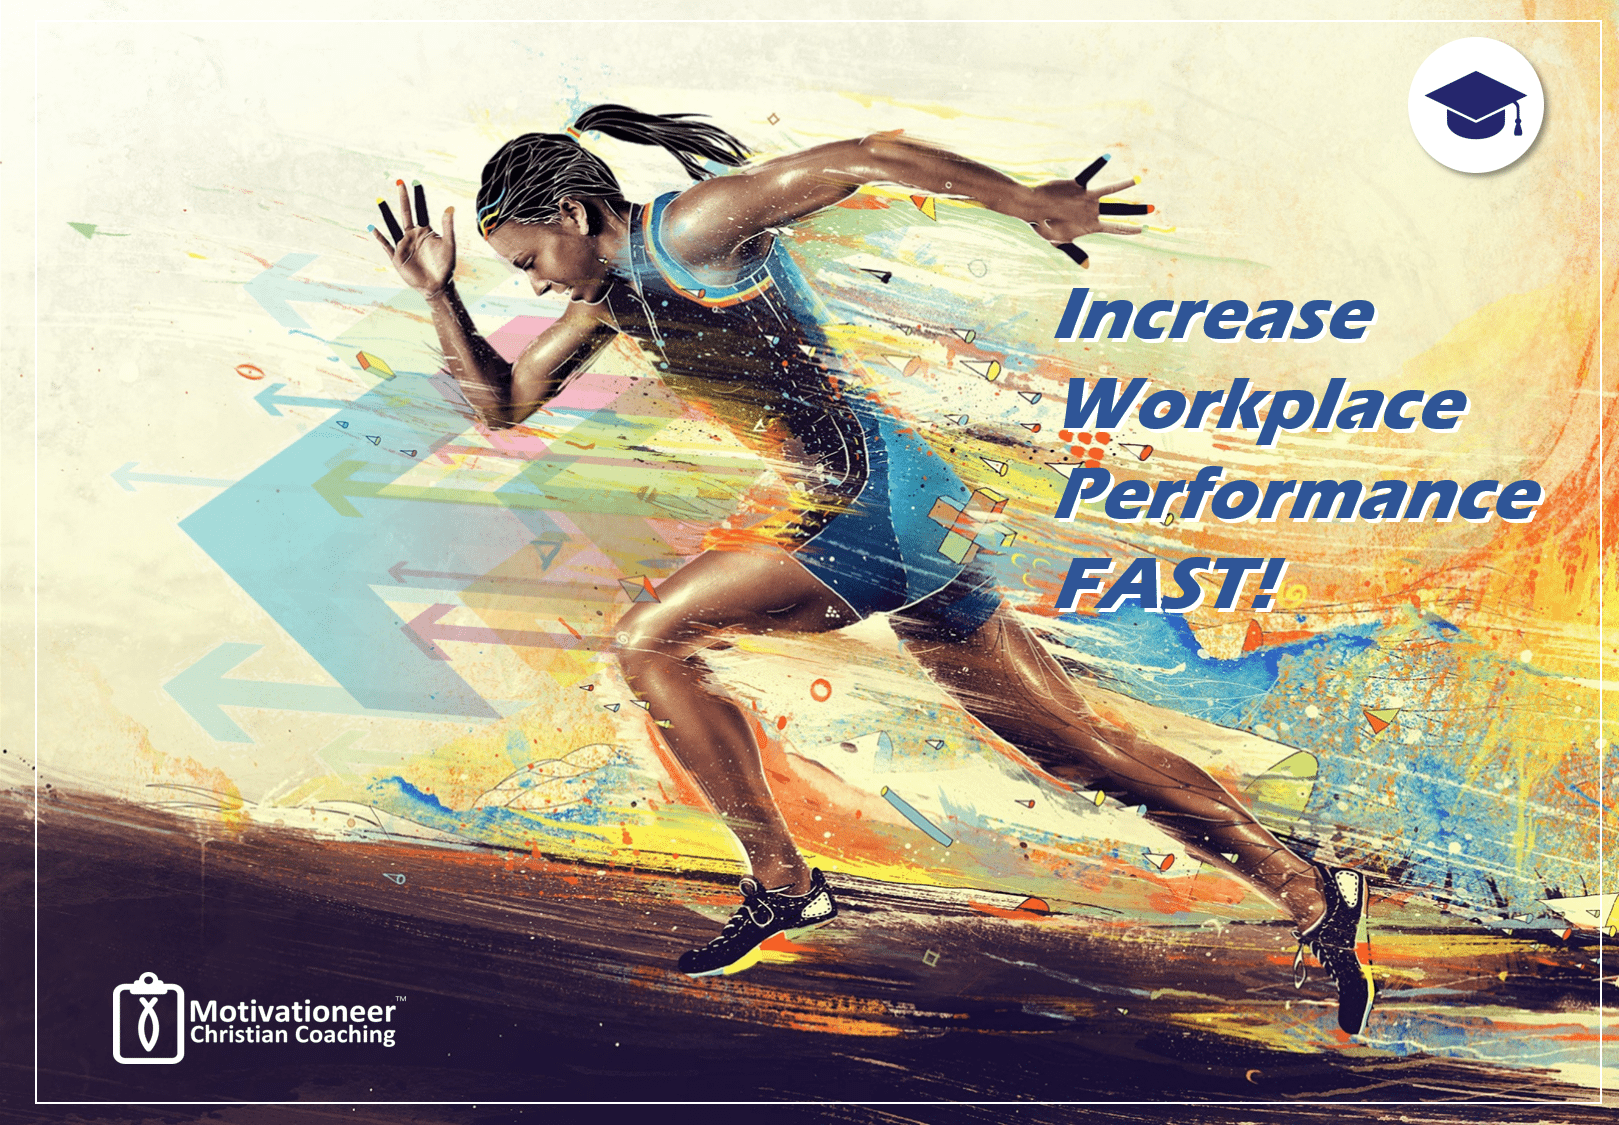 How to Increase Workplace Performance FAST!